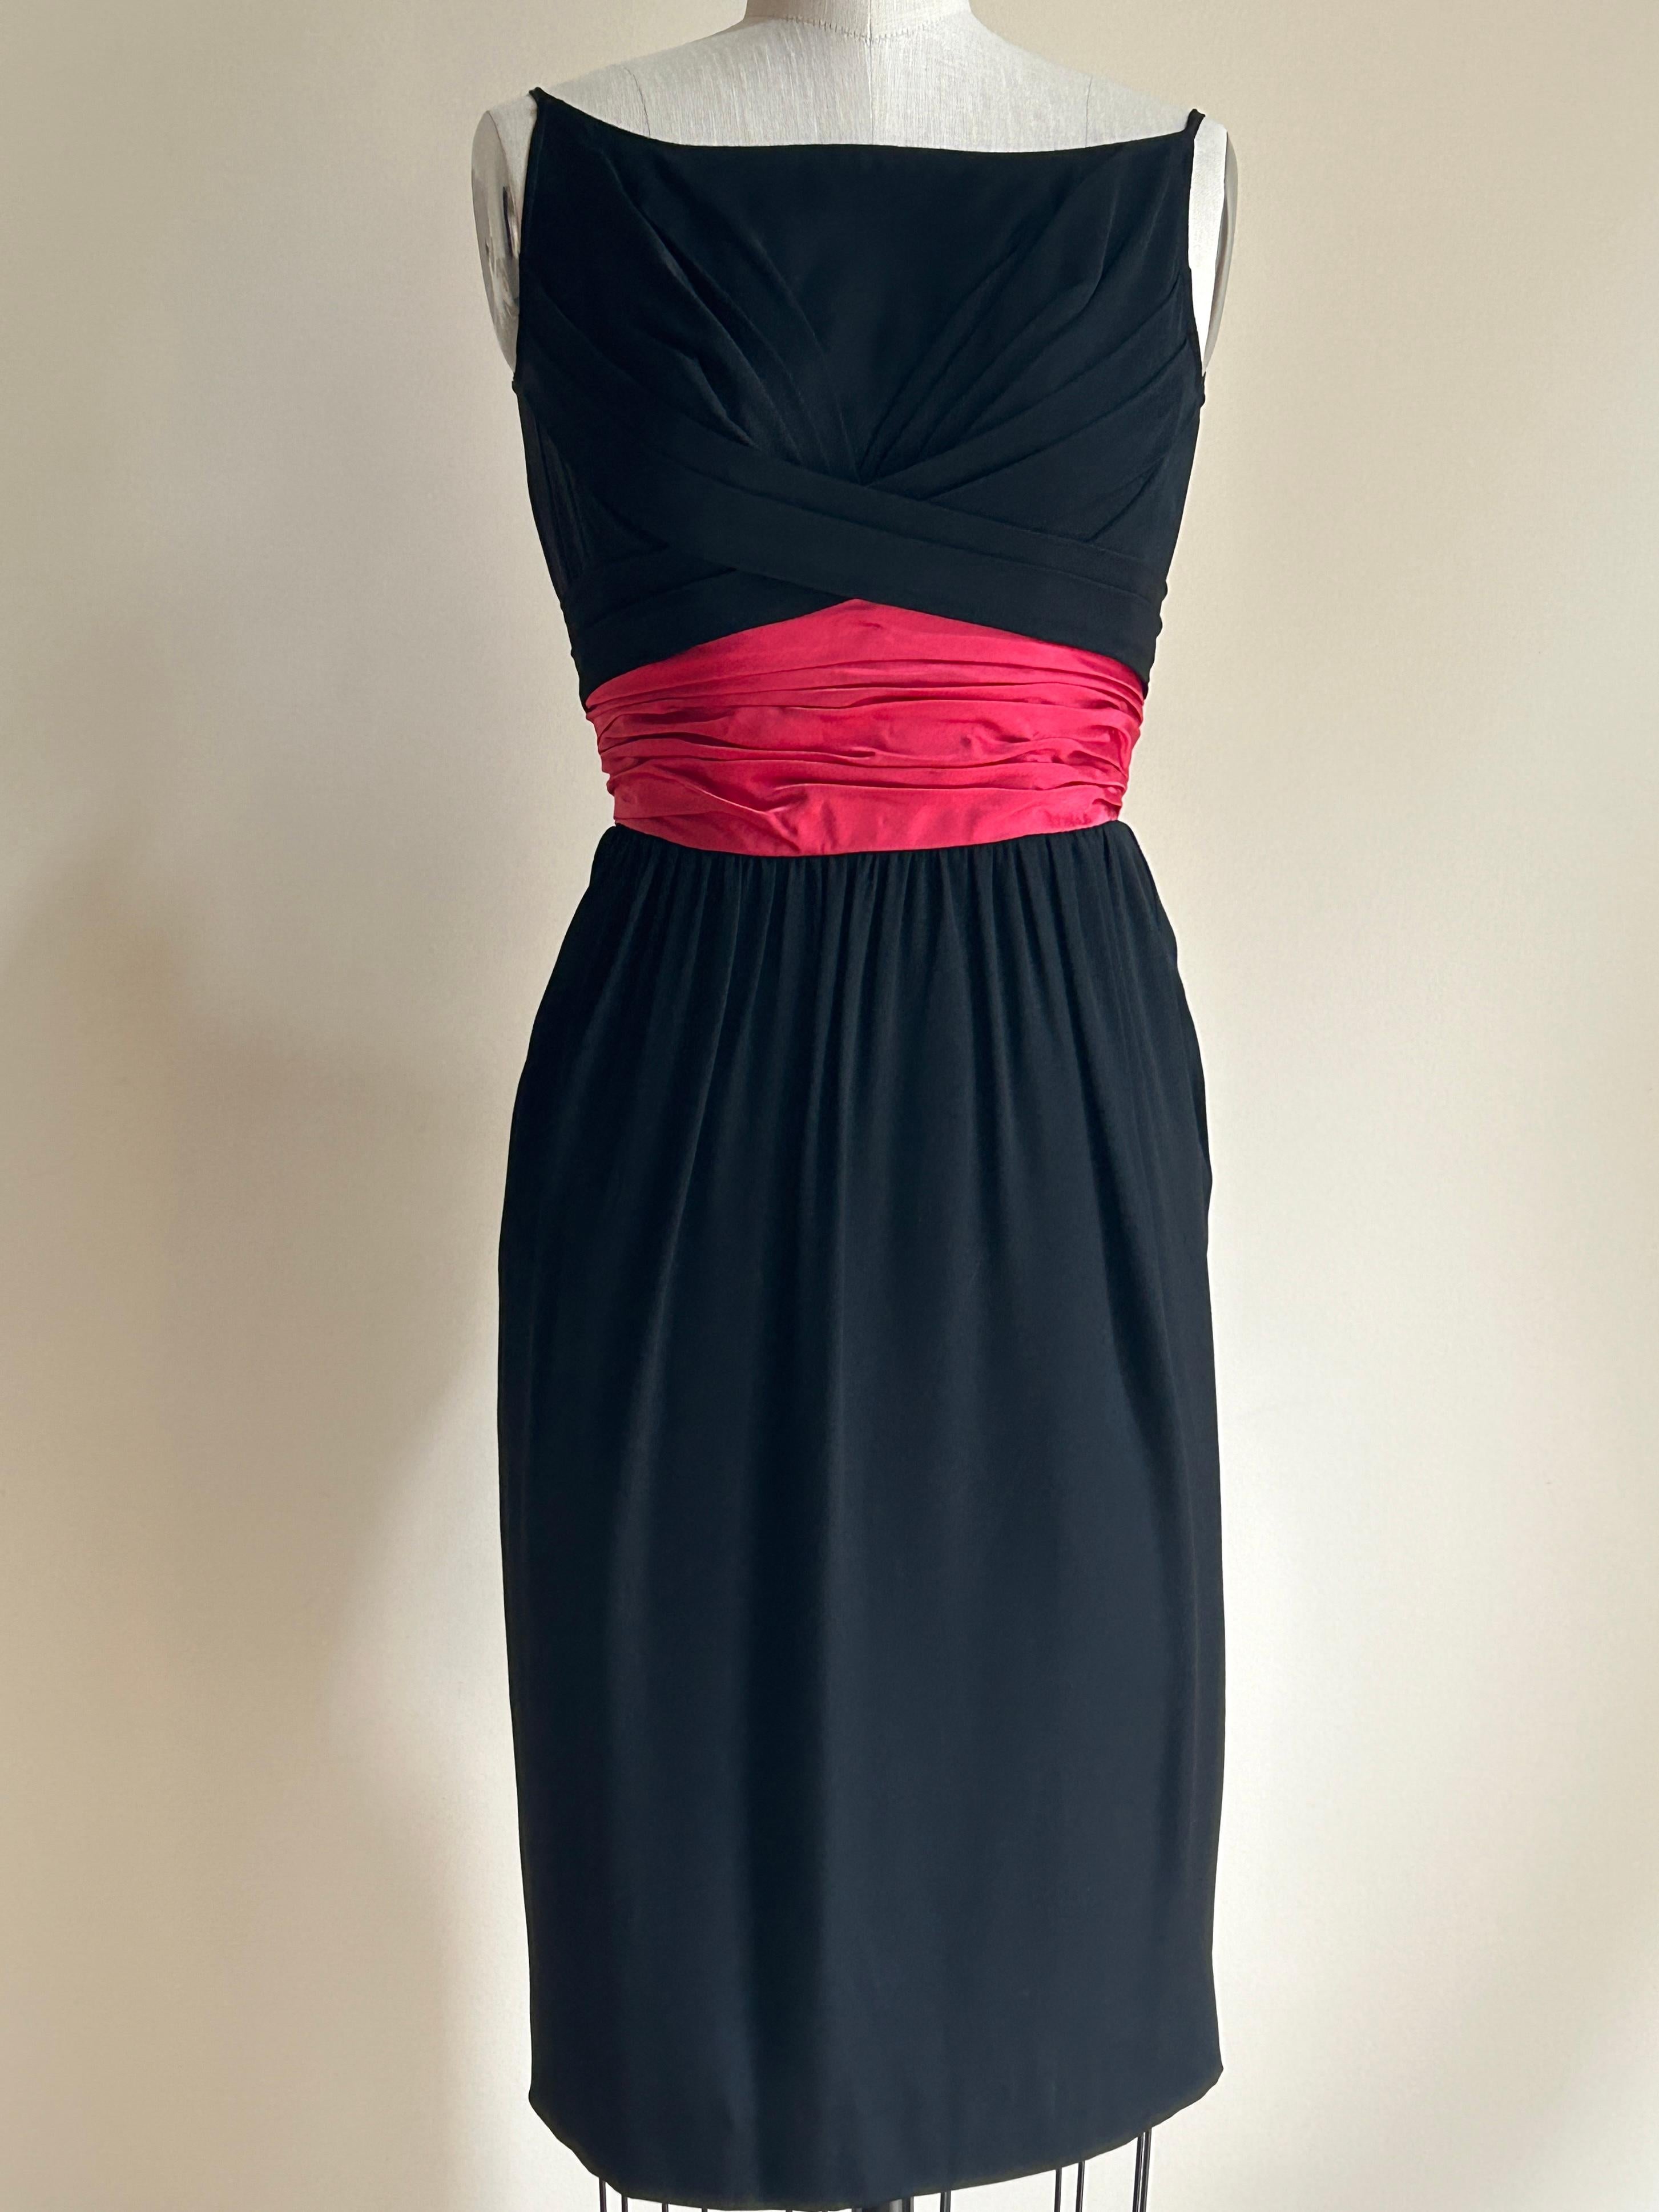 Ceil Chapman vintage 1950s sleeveless black boatneck dress with skinny straps at top shoulder and crossed pleat detail at front and back bodice. Skirt is gathered at deep pink/red attached satin sash-like detail at waist. Back zip (there are hook